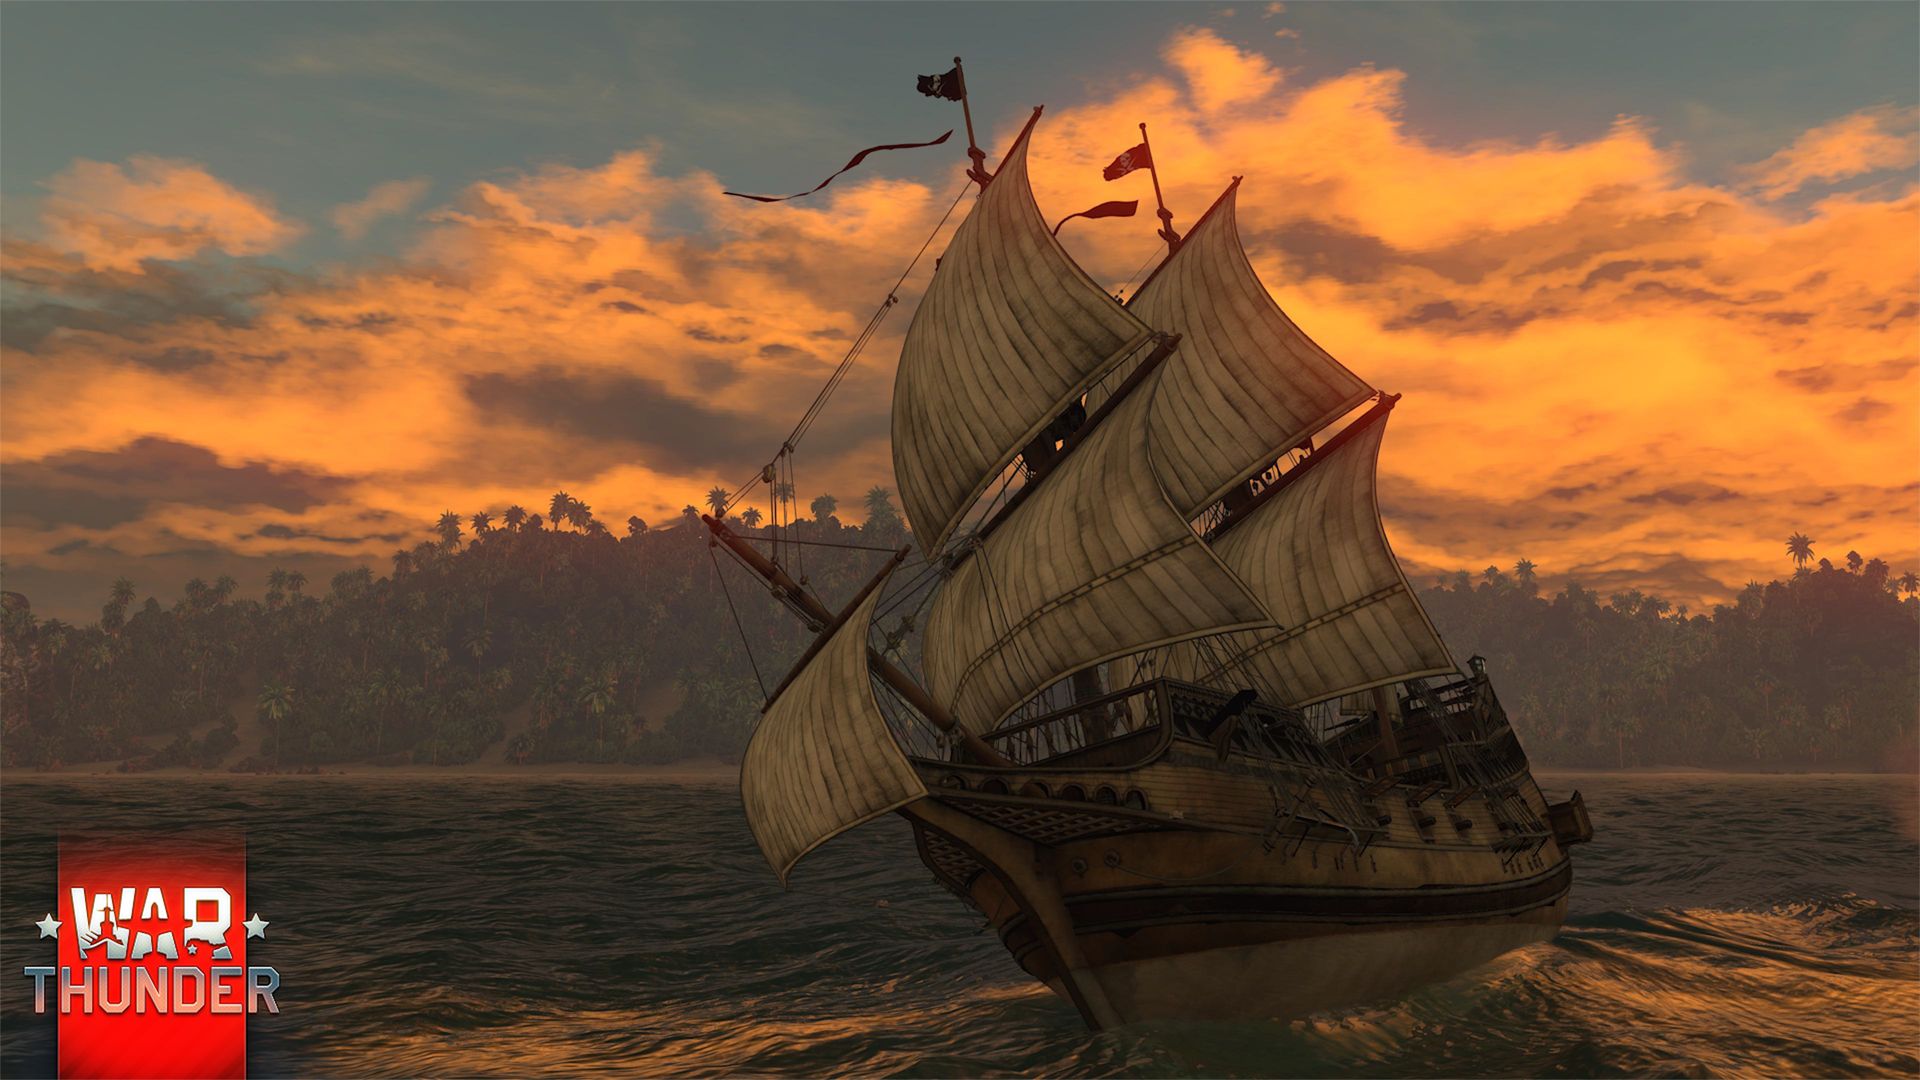 War Thunder introduces legendary sailing ships in latest update